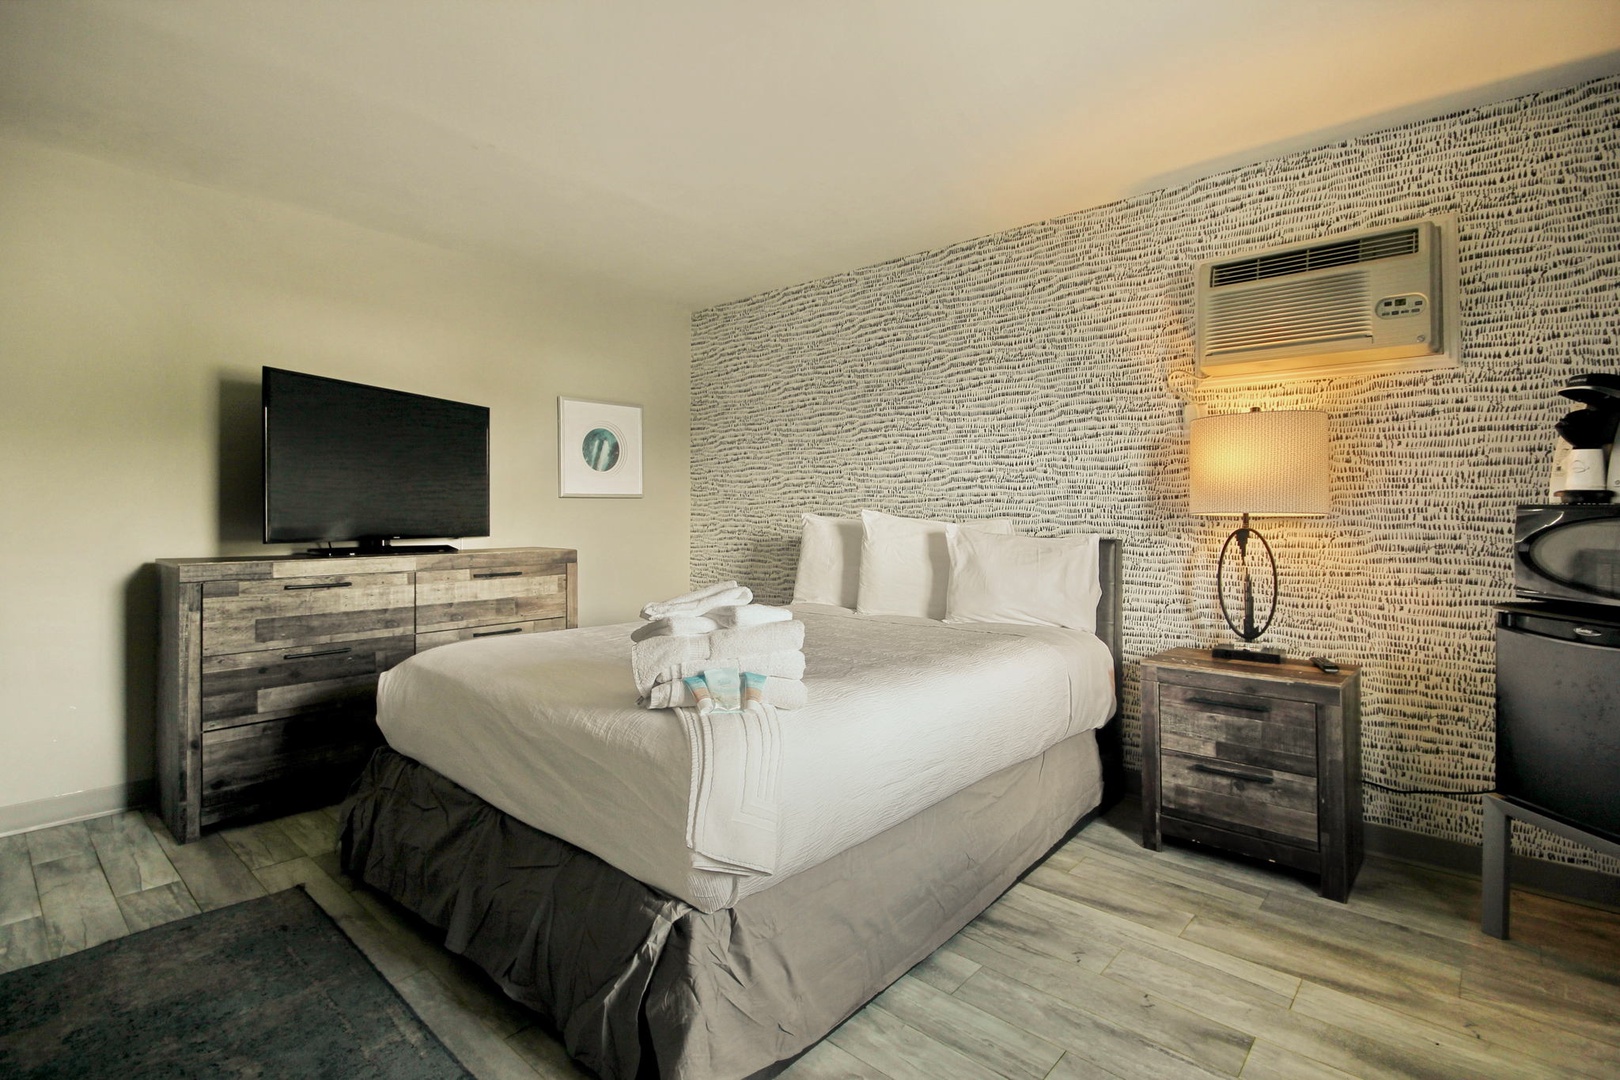 Unwind in the tranquility of the queen bedroom